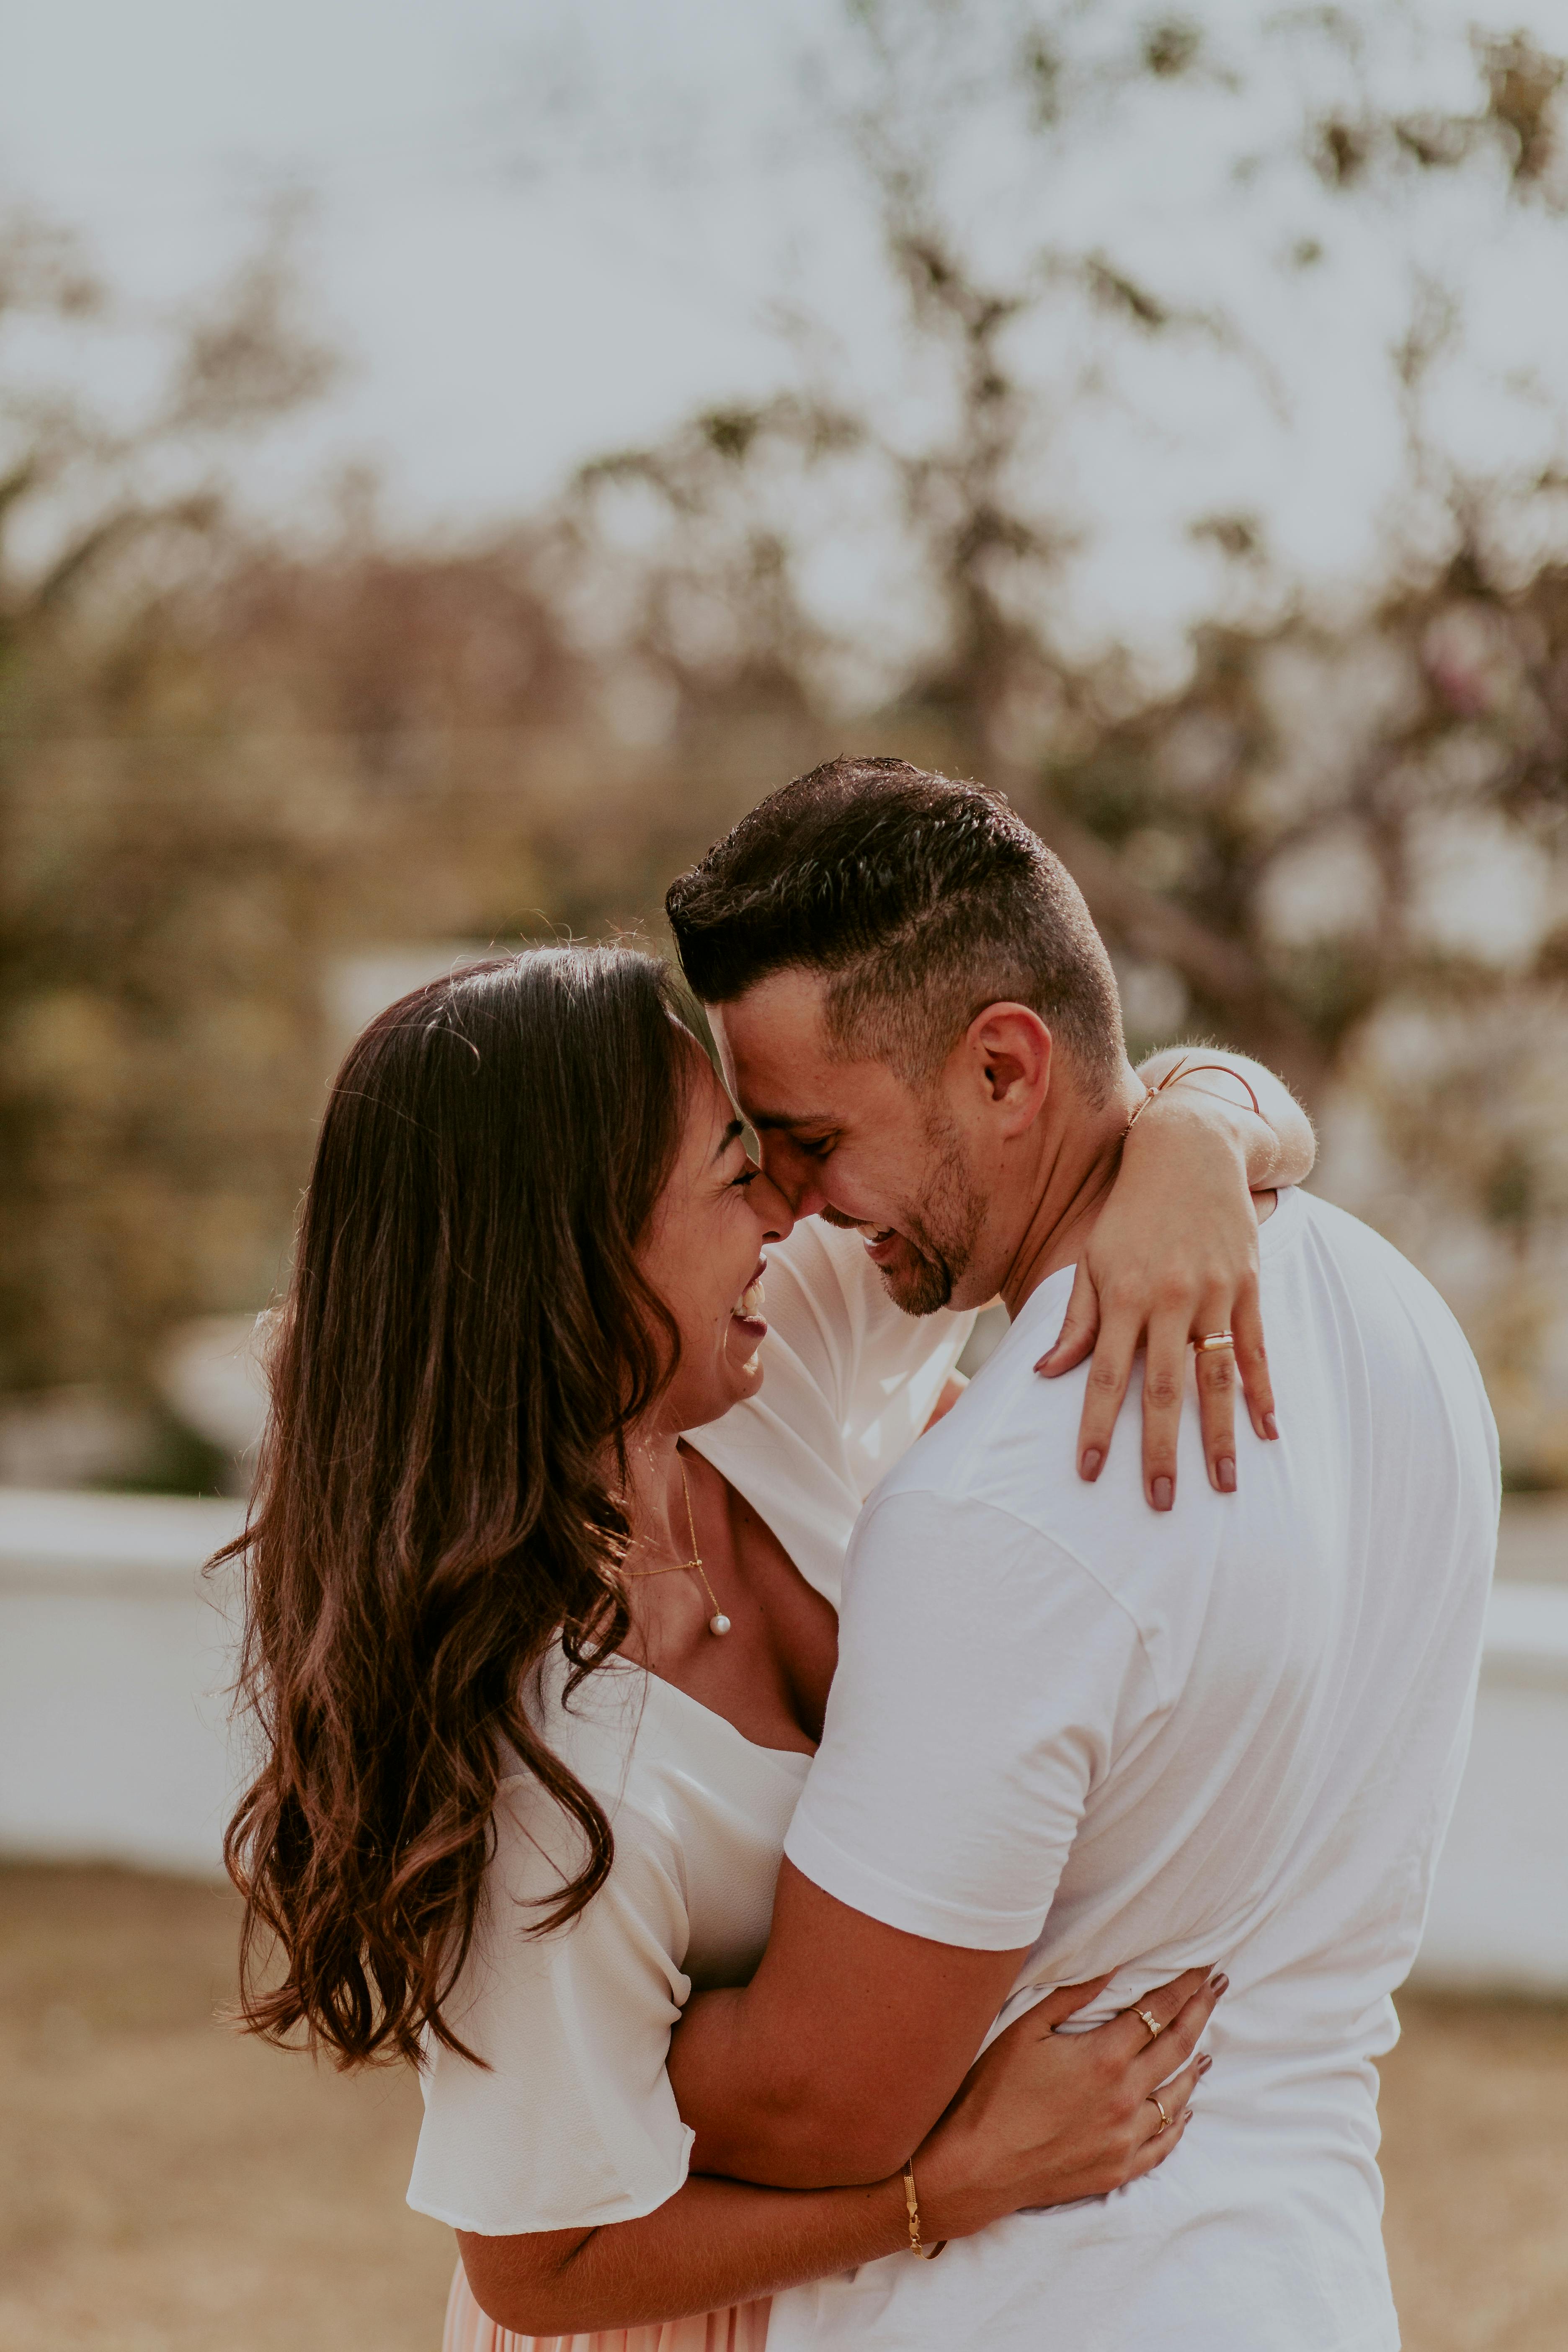 A happy and deeply in love couple embracing outside | Source: Pexels